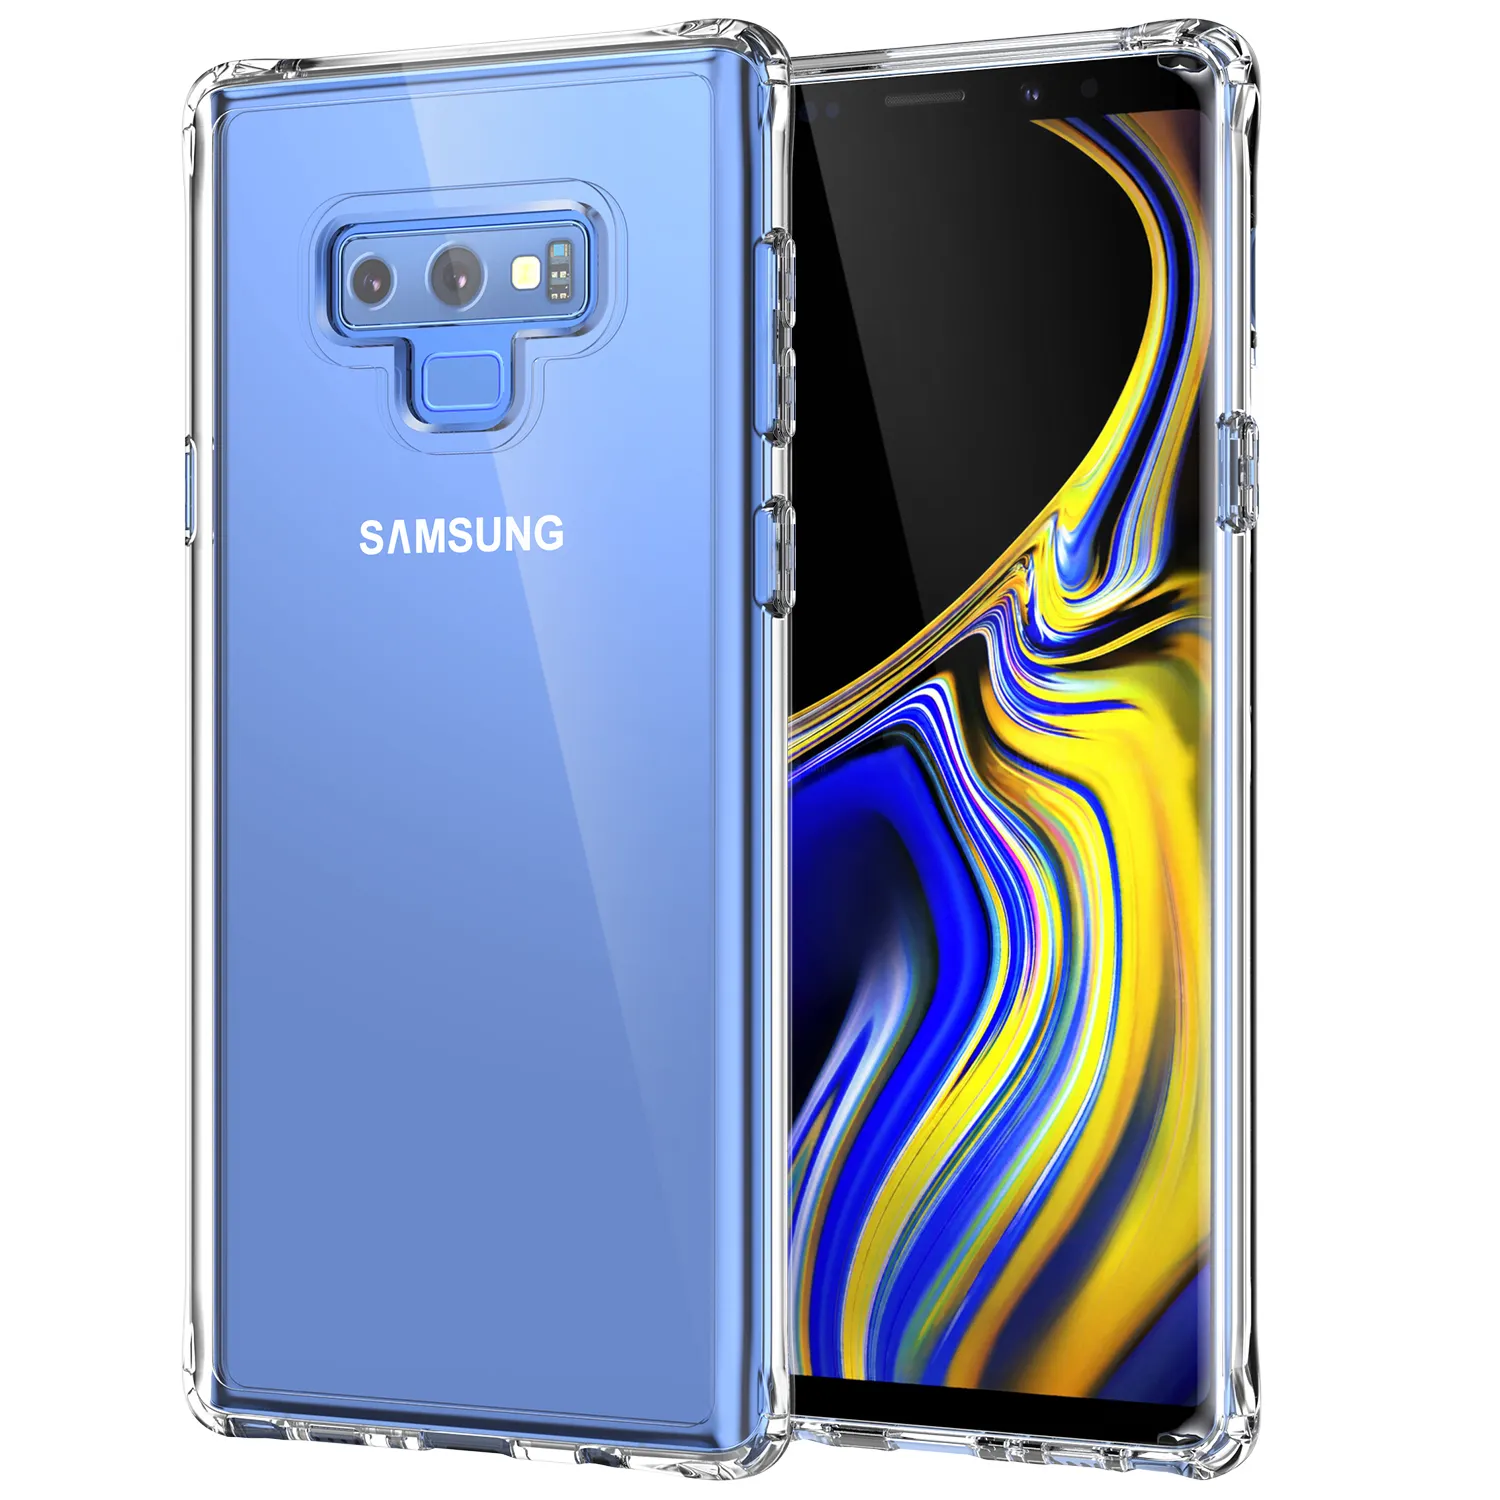 Phone Case Cover For Samsung Note 9 Shockproof 2 in 1 Plastic Hard clear case For Samsung Galaxy Note 9 10 PC Phone Case